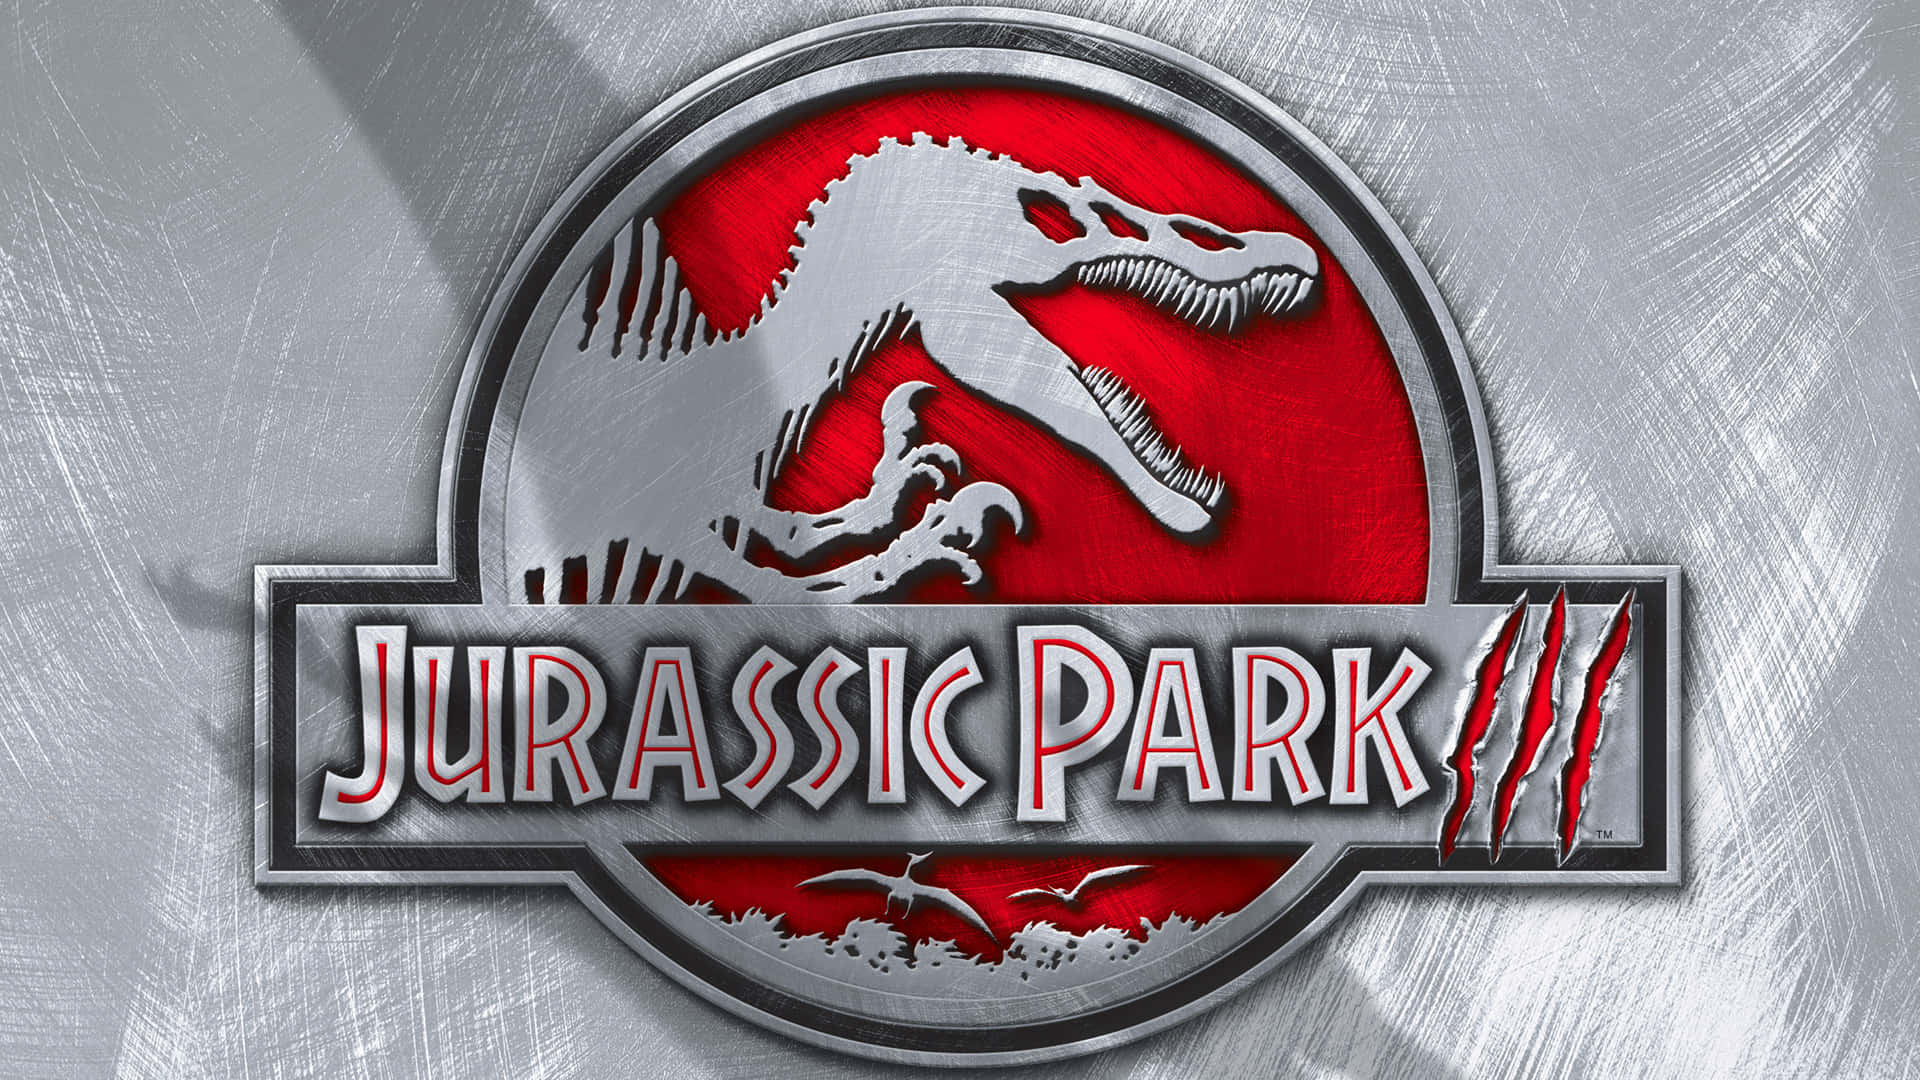 Experience Jurassic Park from the Comfort of Your Home